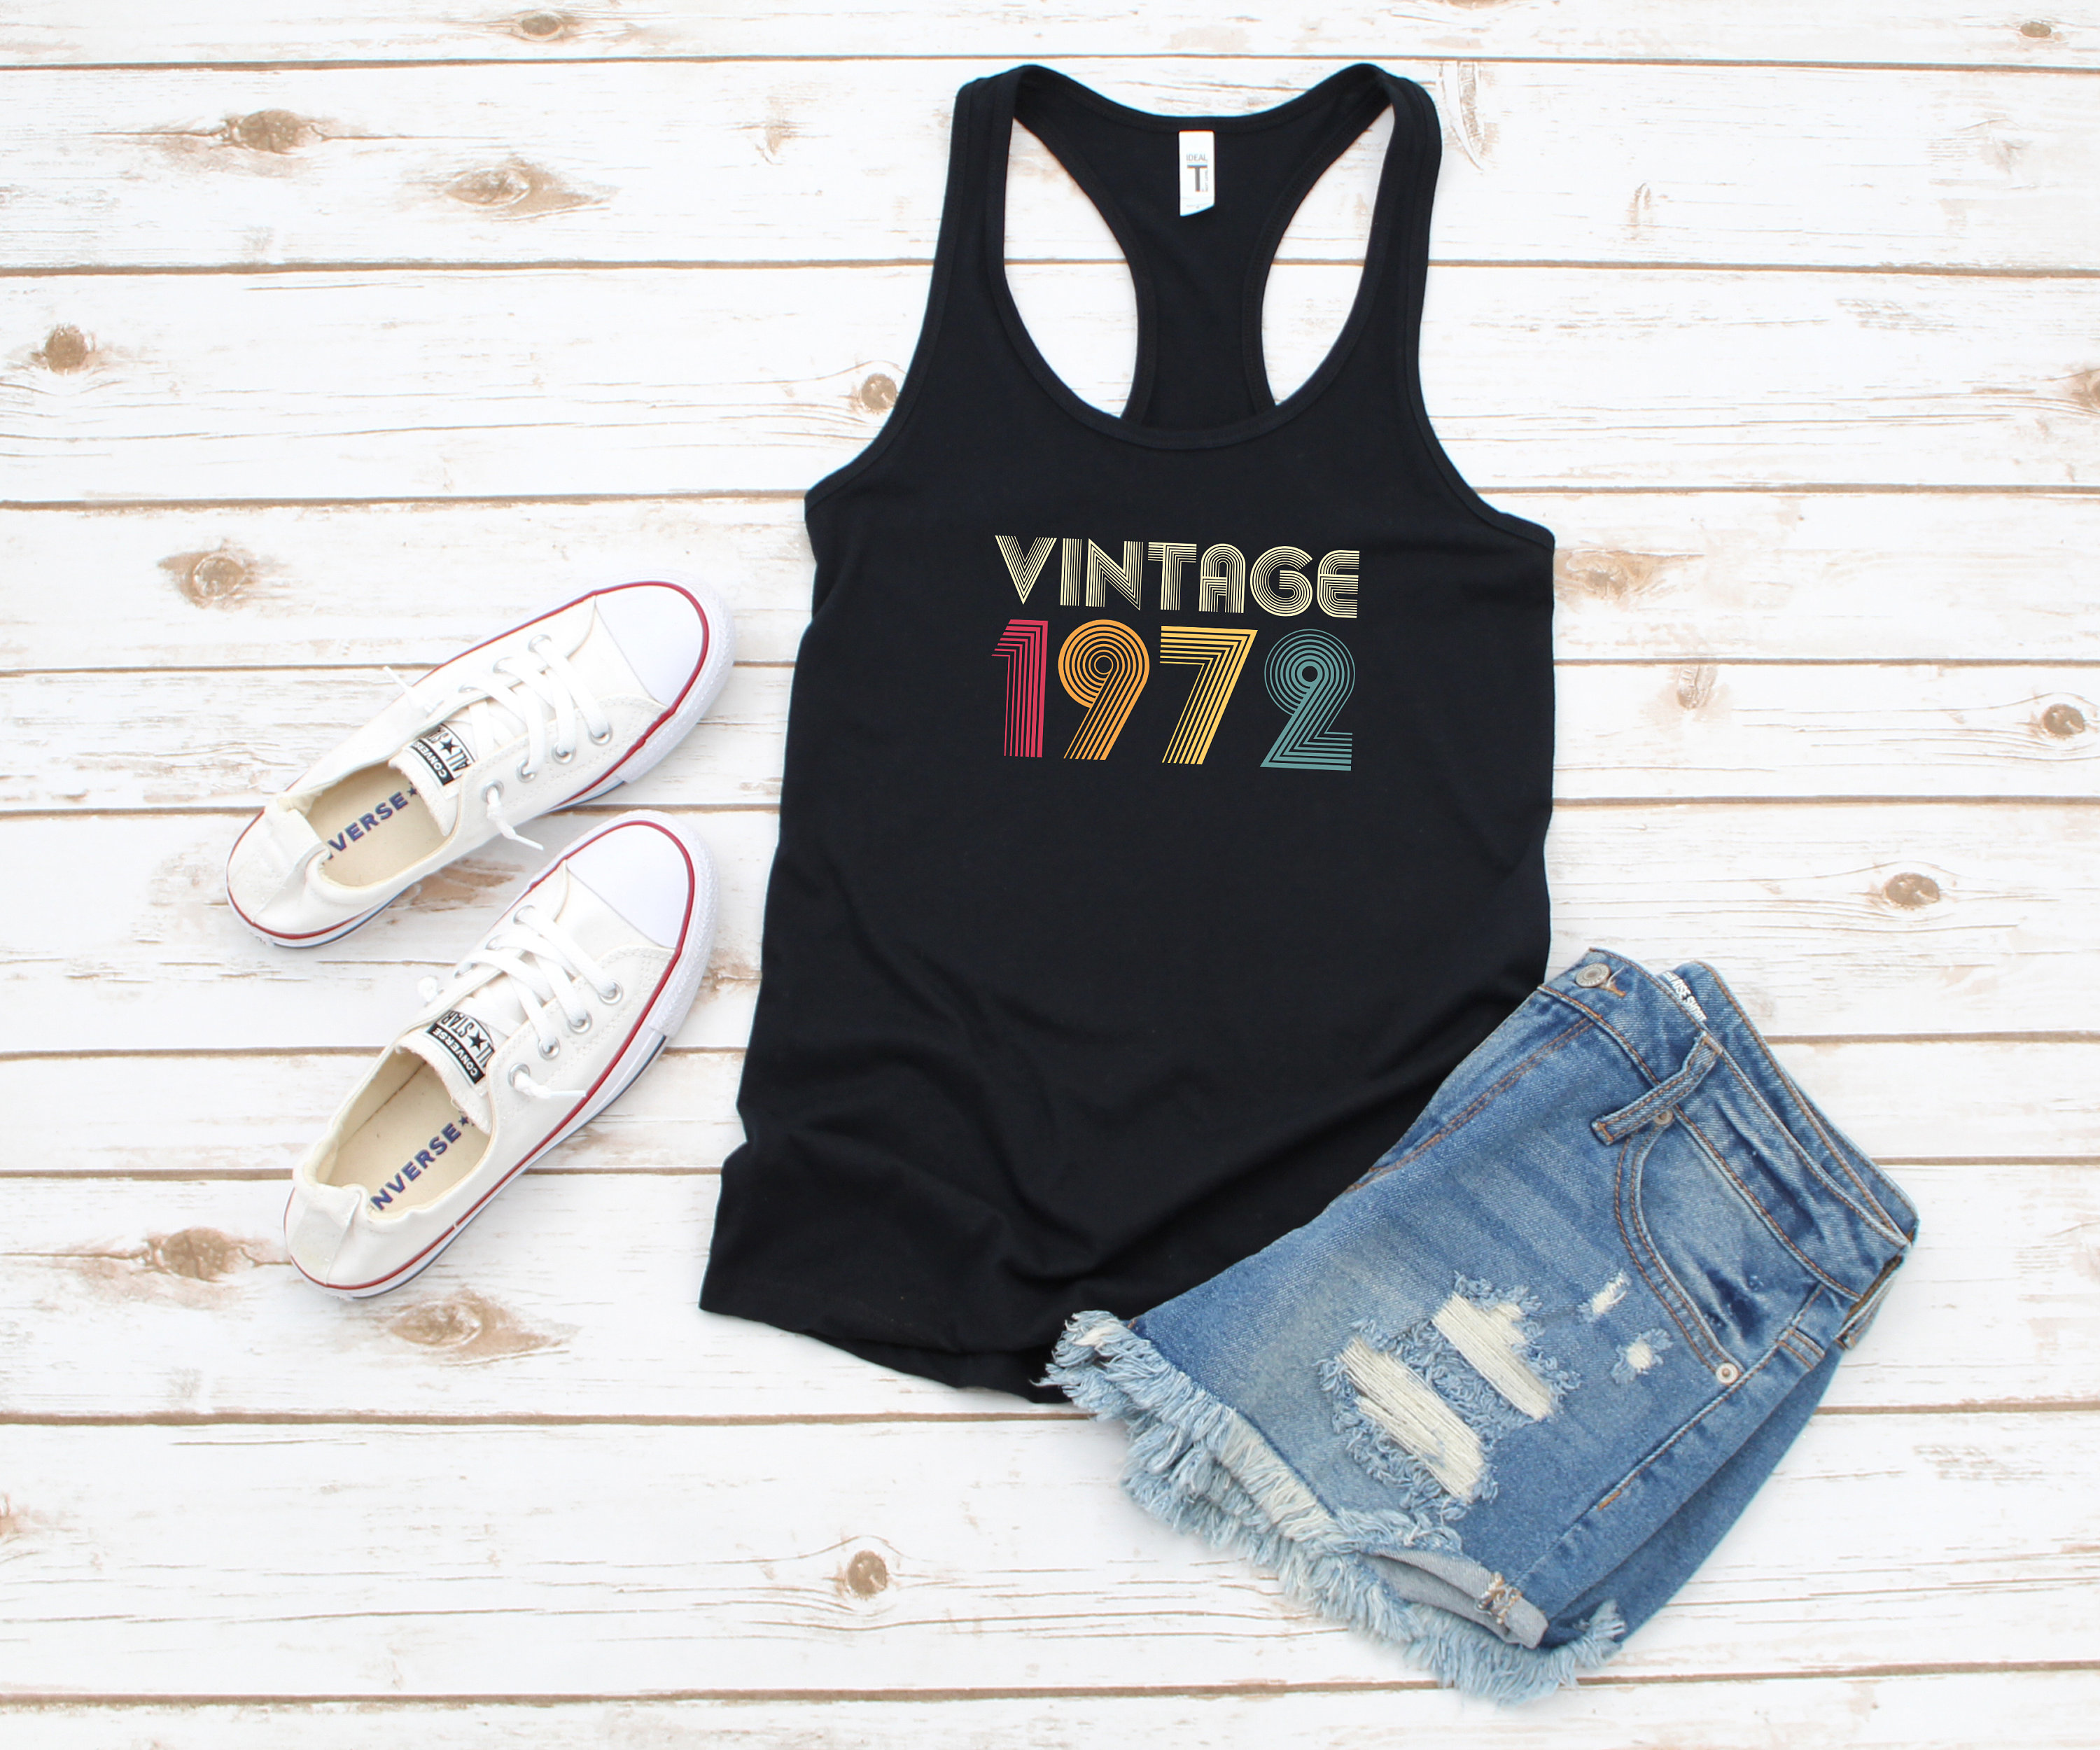 71st Birthday shirt for her him Vintage Born in 1950 Tank Tops for Women men Made in 1950 Tanks 1950 Birthday Gift 71 Year Old Birthday